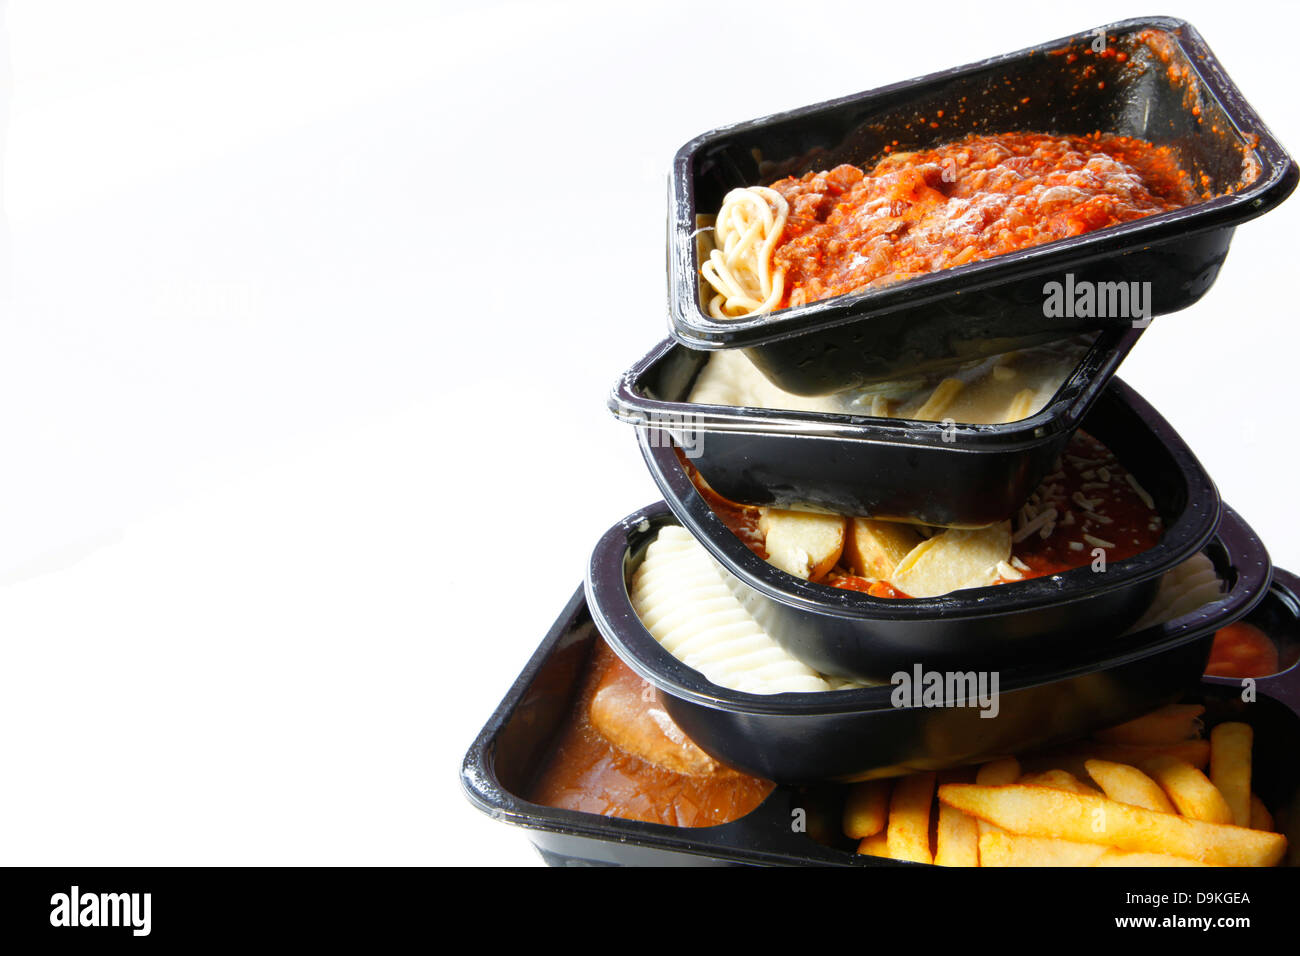 A stack of frozen ready meals on a white background. Stock Photo